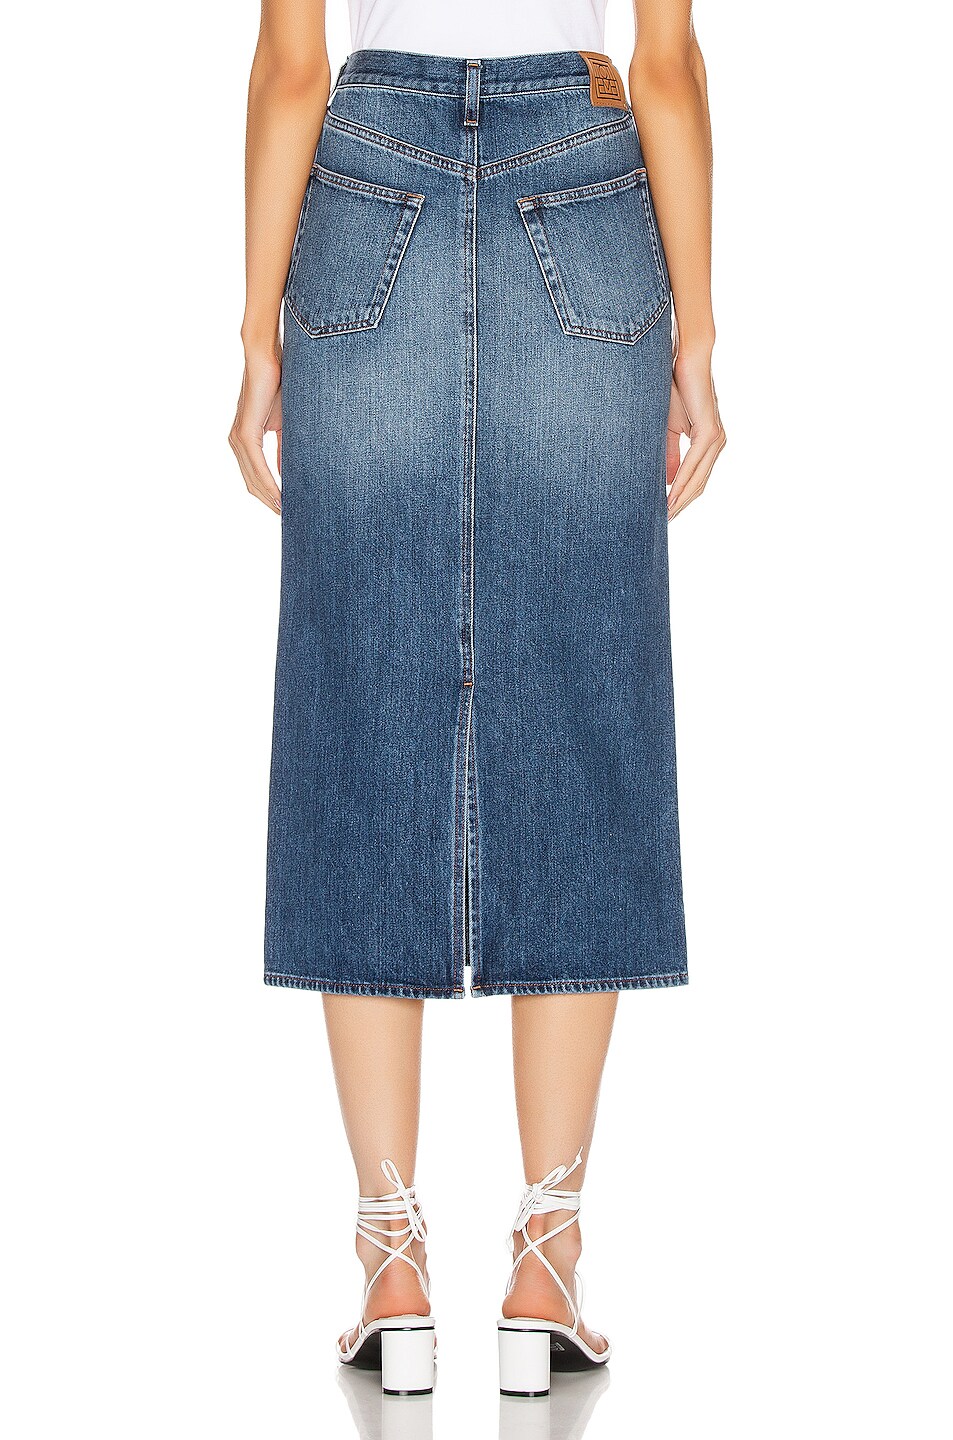 Toteme Bitti Skirt in Washed Blue | FWRD